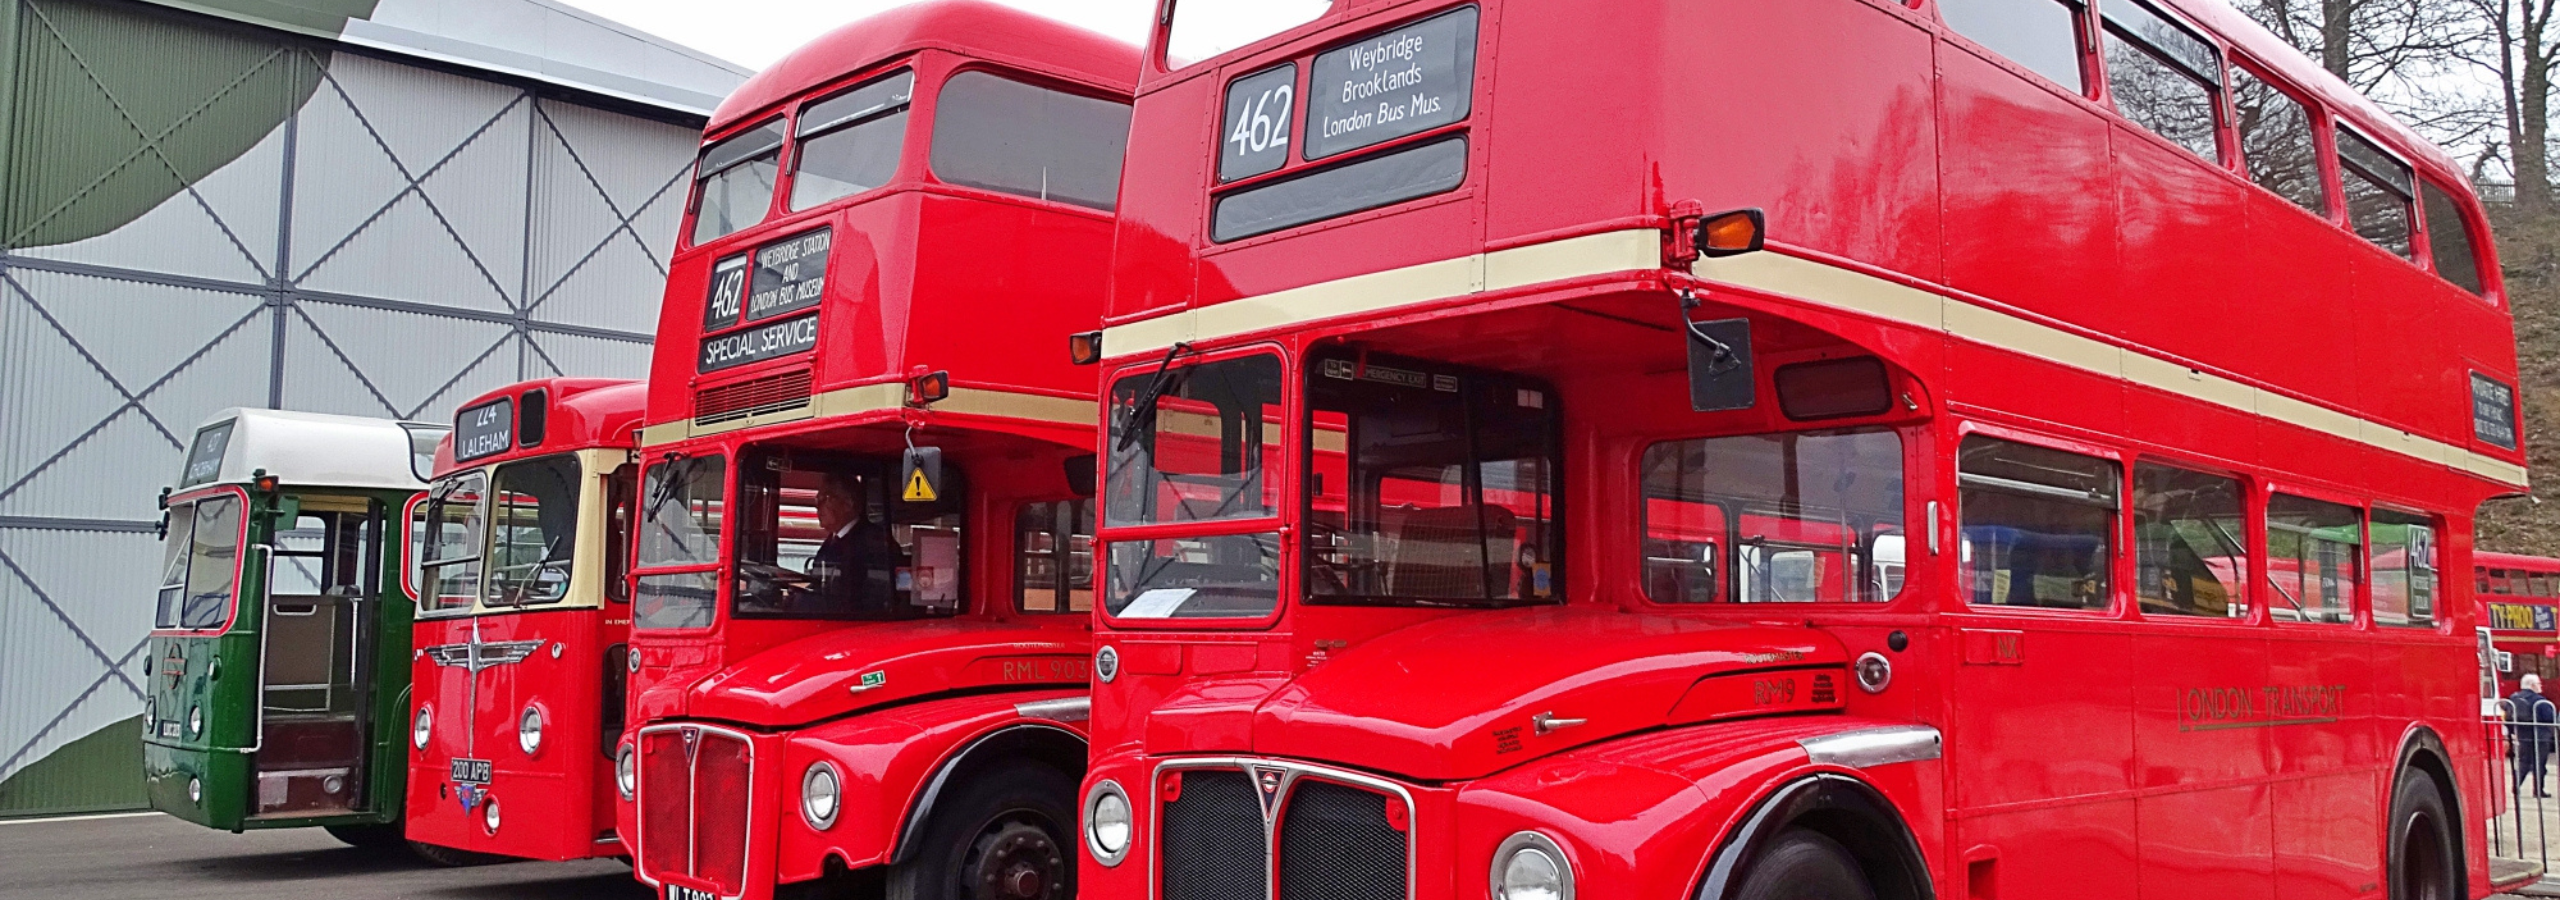 London Bus Day